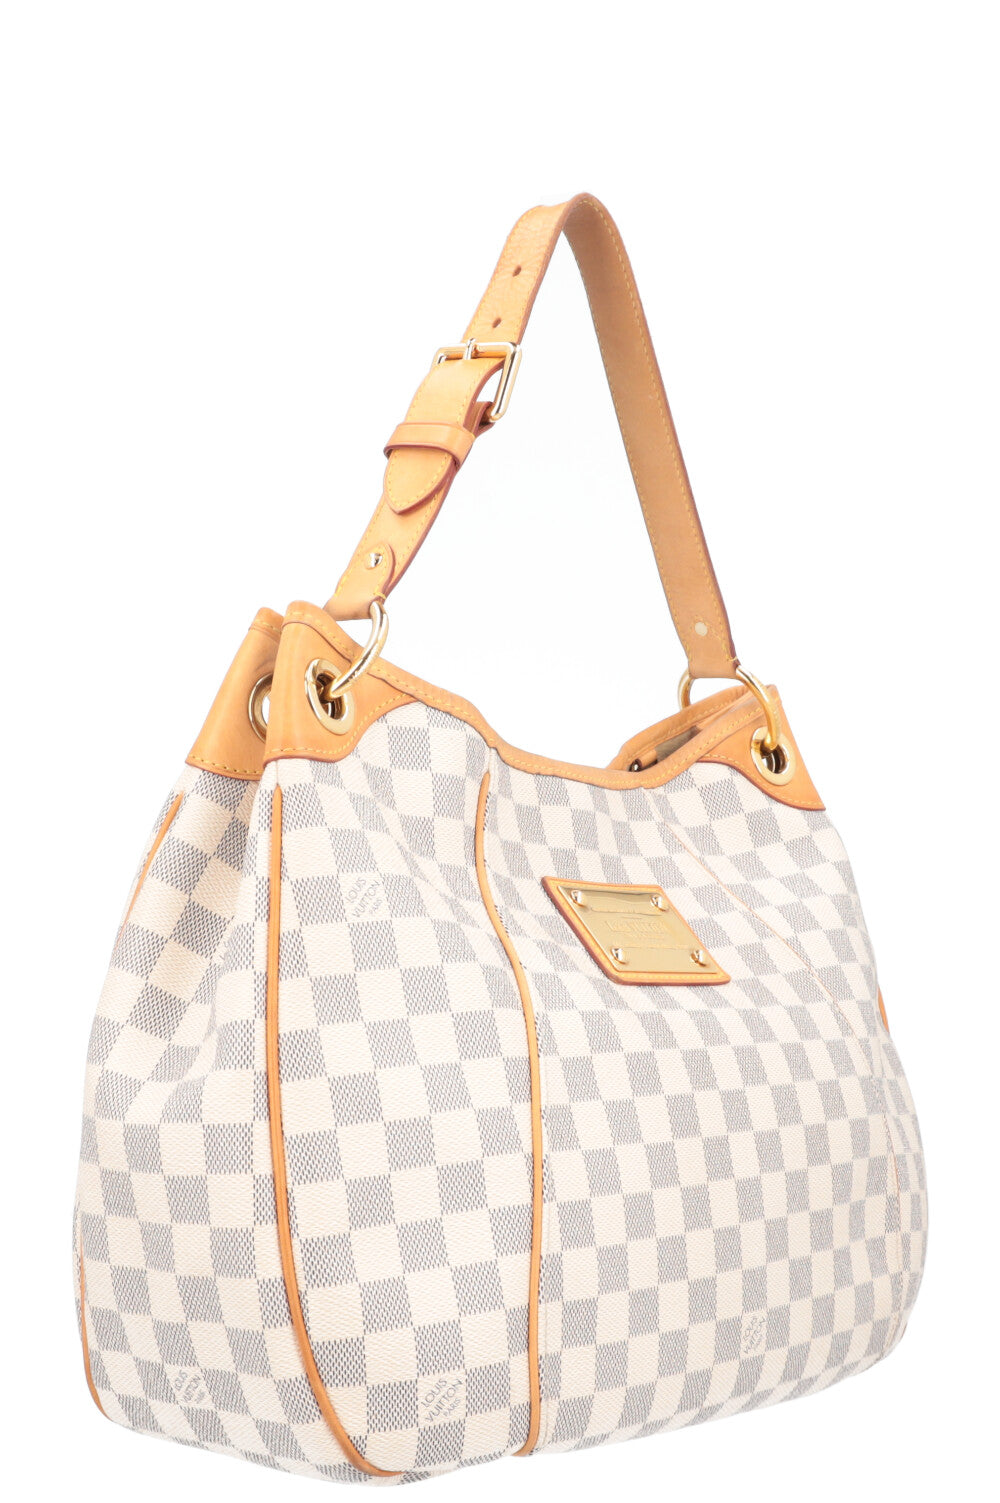 Louis Vuitton Galliera Limited Edition “French Riviera” - Comptoir